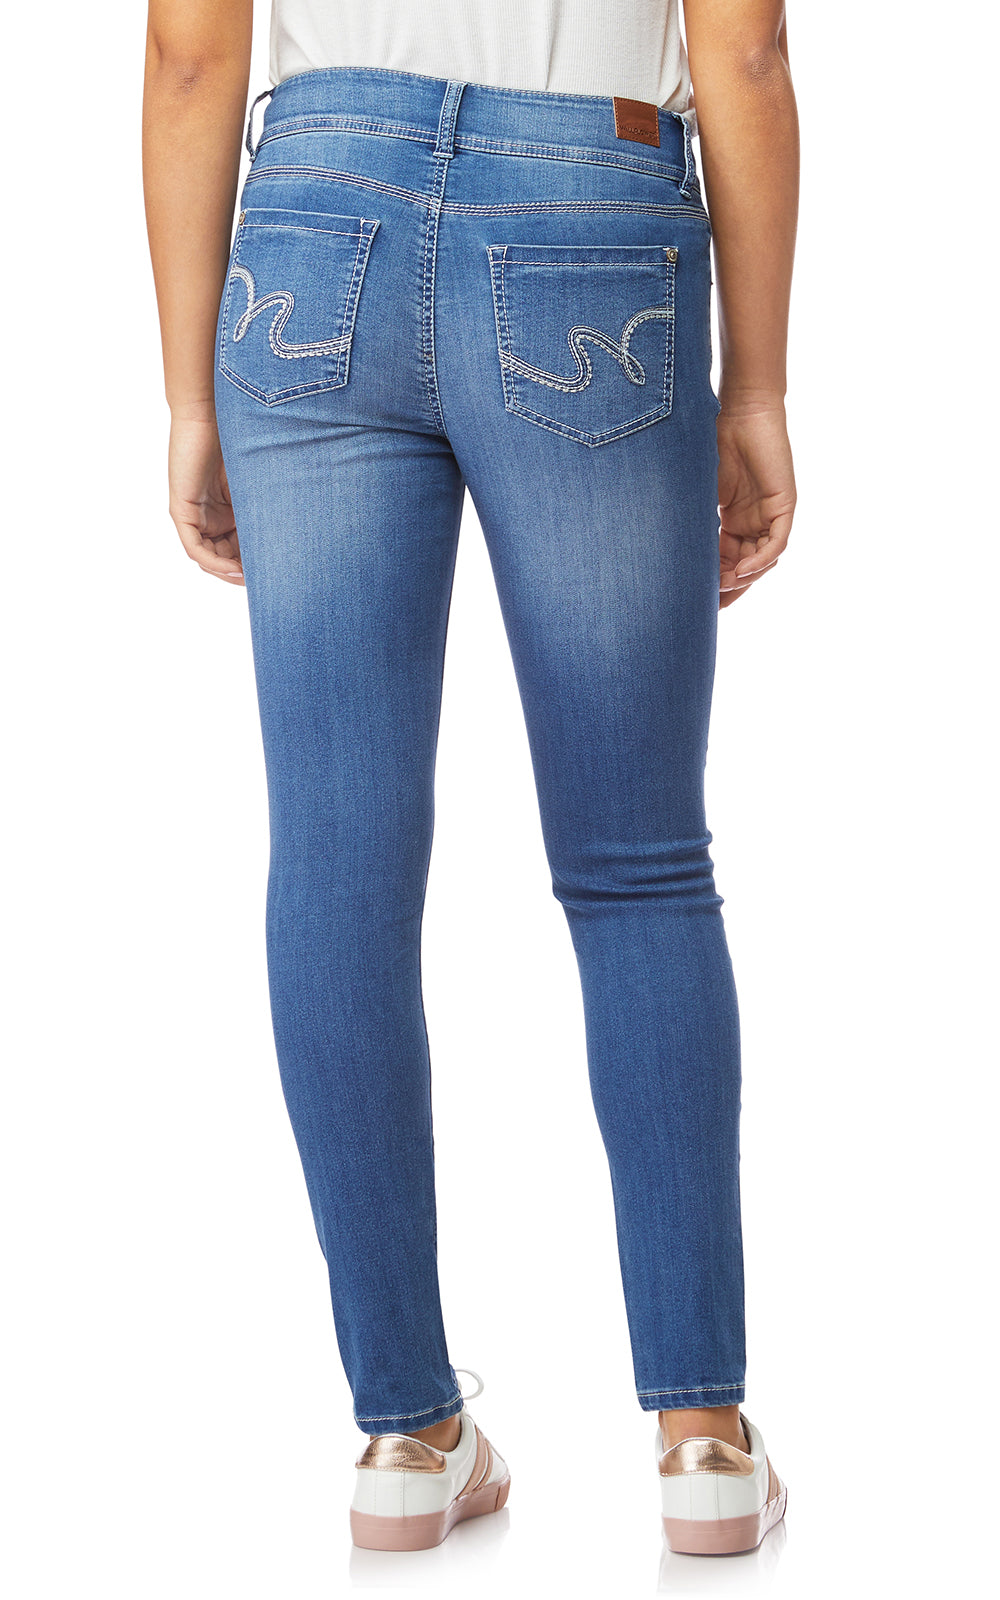 Actiff Low Rise Skinny Fit Jeans